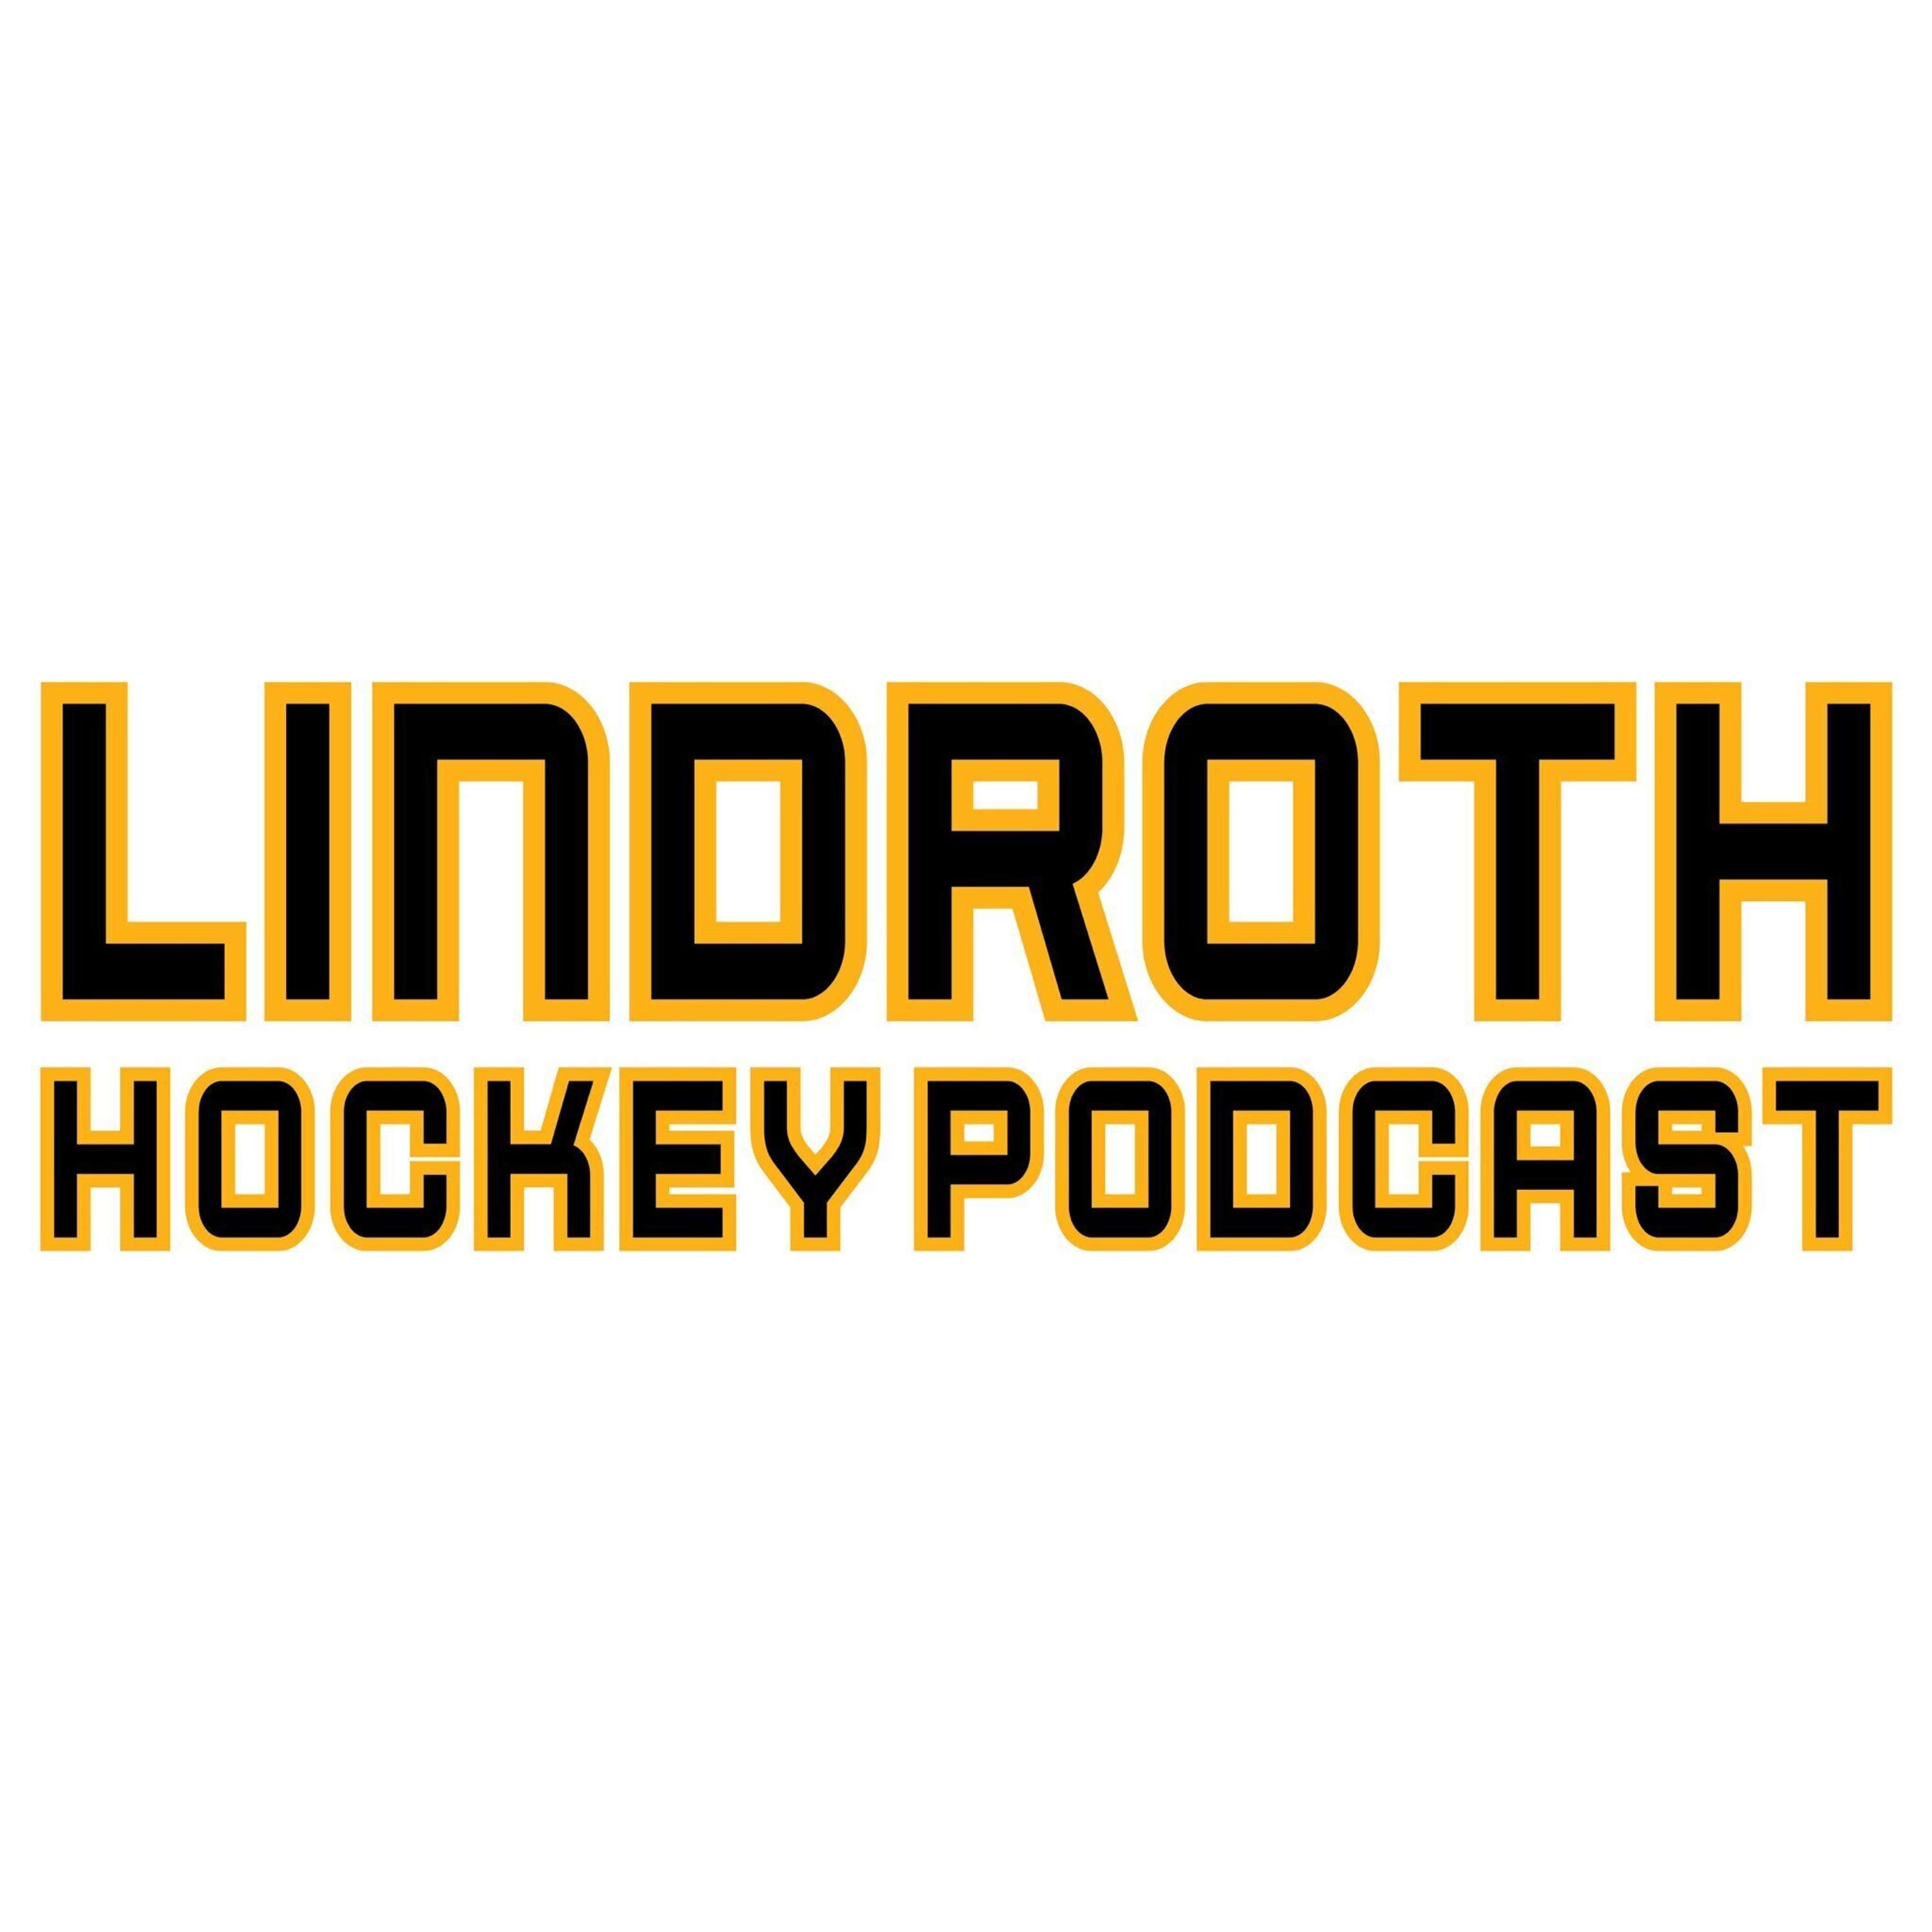 Episode 157: Boston Bruins and NHL Trade Deadline Review